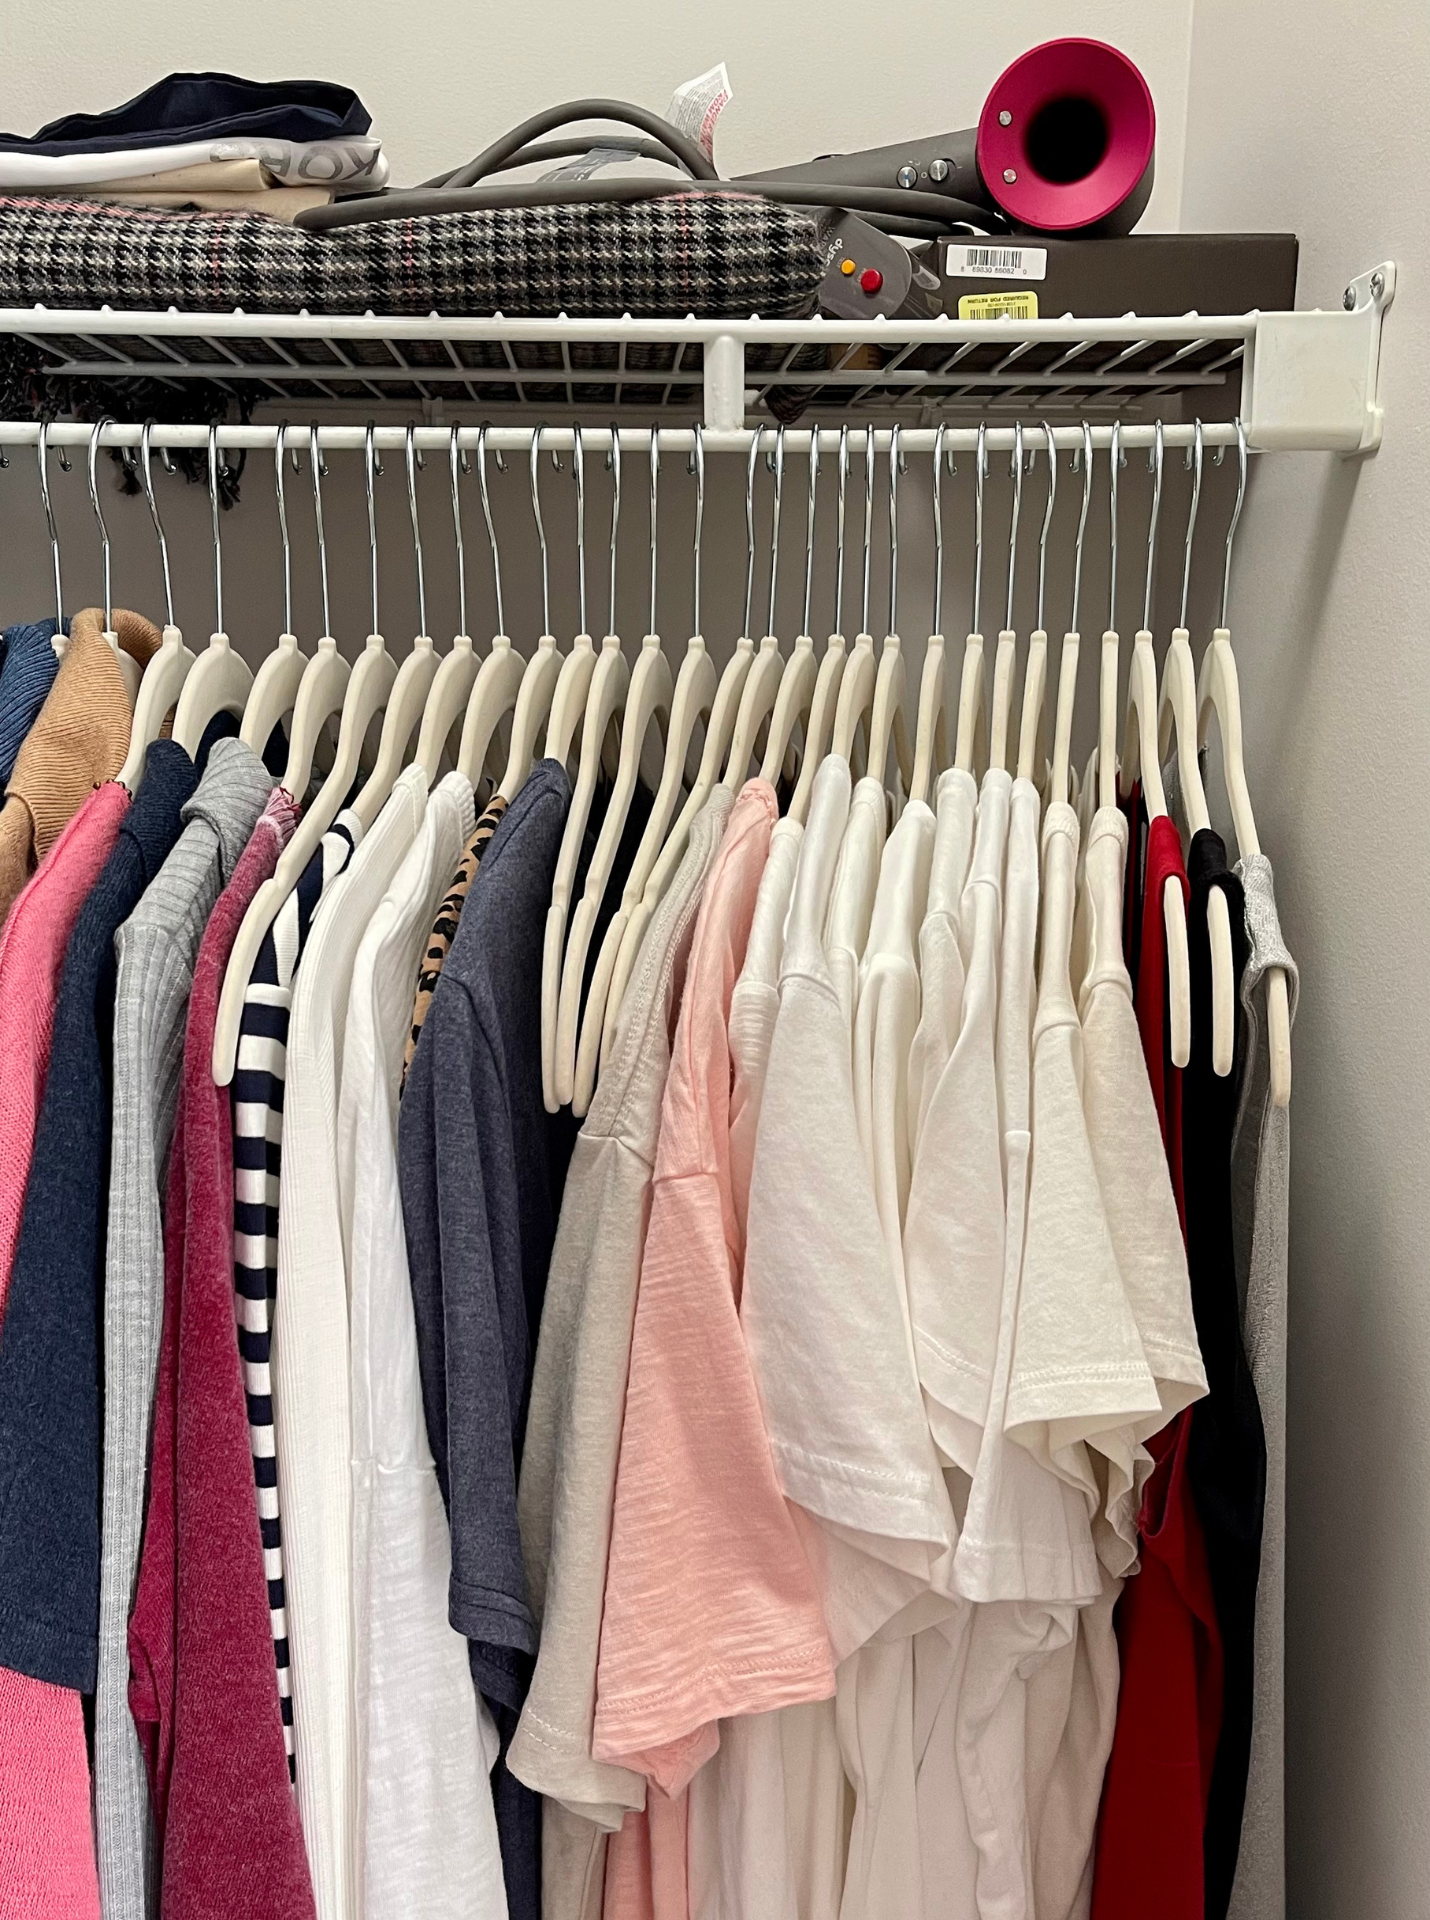 10 Things to Remove from Your Closet to Refine Your Wardrobe